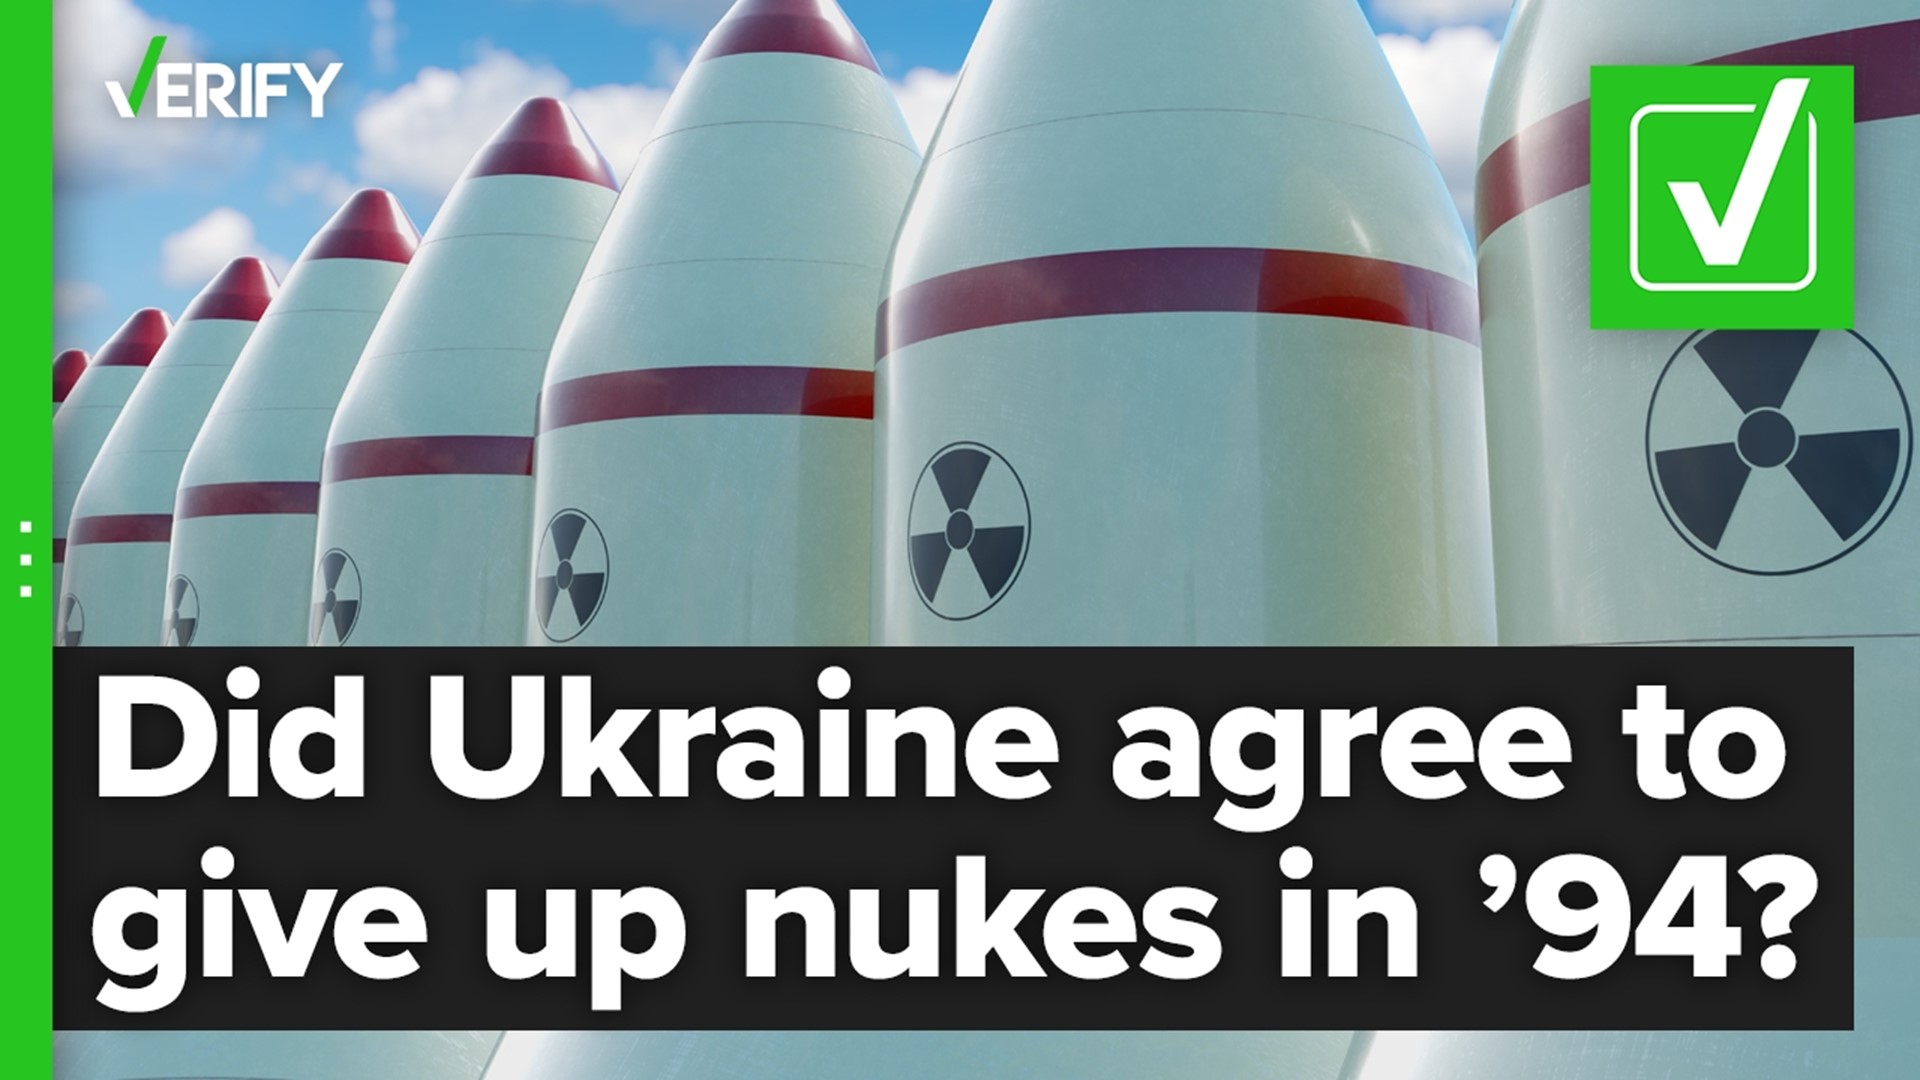 Ukraine, Russia, the U.S. and the UK signed a 1994 treaty that assured Ukraine it would be safe from attack as long as it gave up its massive stockpile of nukes.